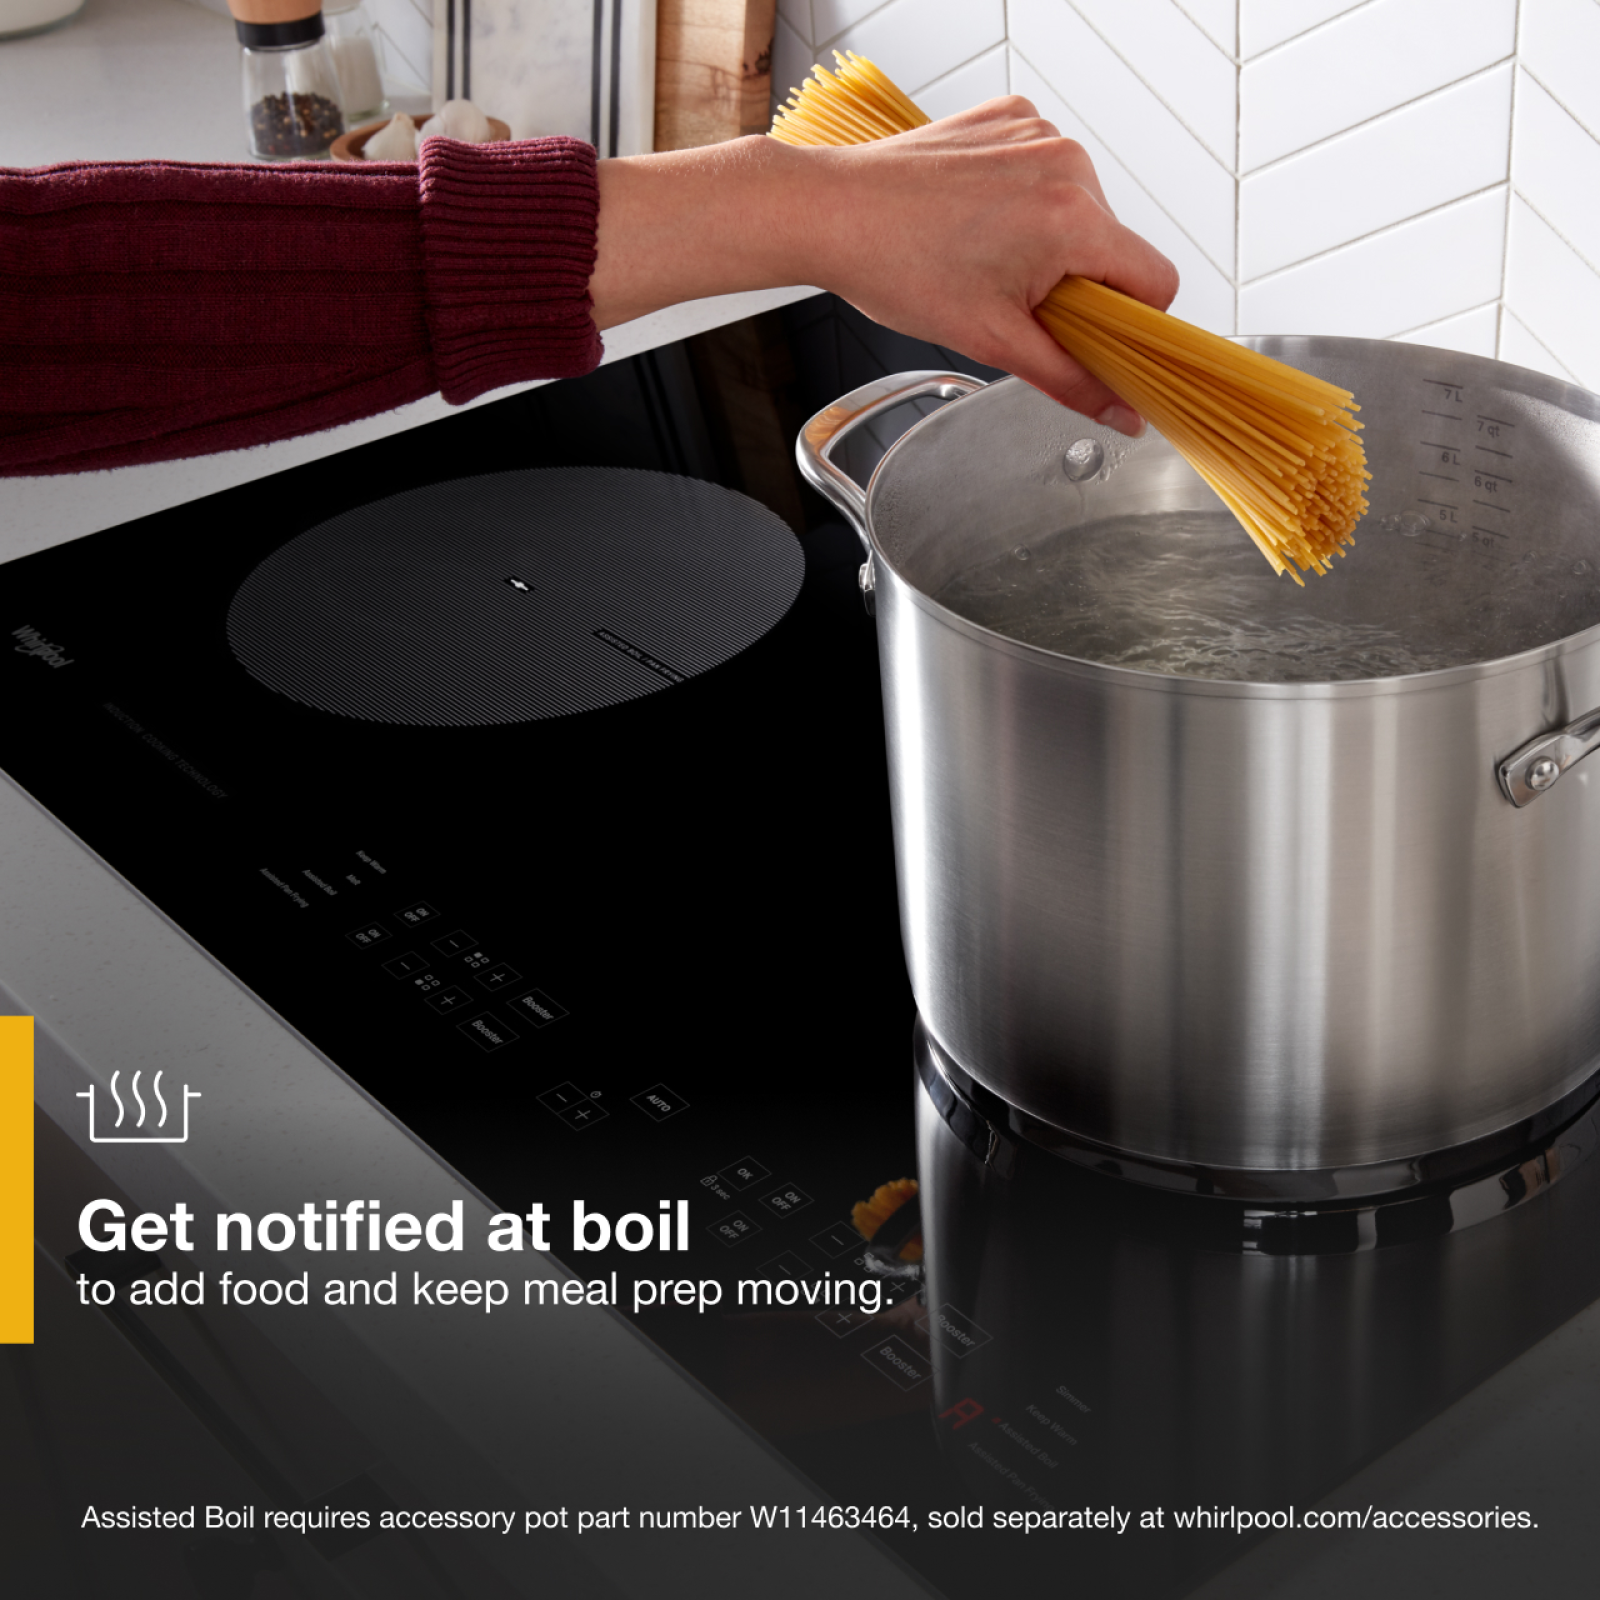 Whirlpool - 30.8125 inch wide Induction Cooktop in Black - WCI55US0JB